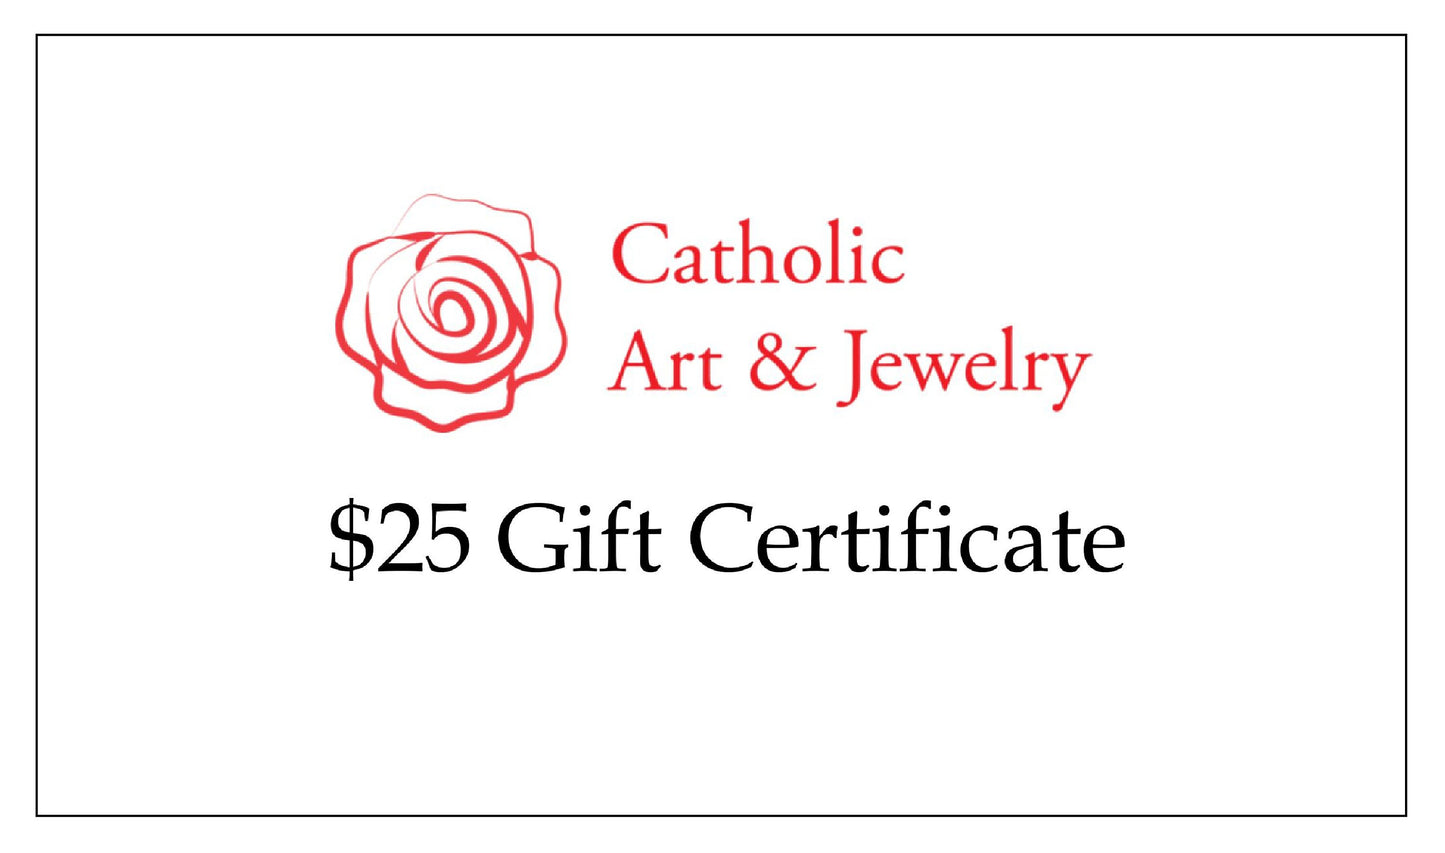 25 Dollar Gift Certificate Only Redeemable in our shop, ClassicCatholic